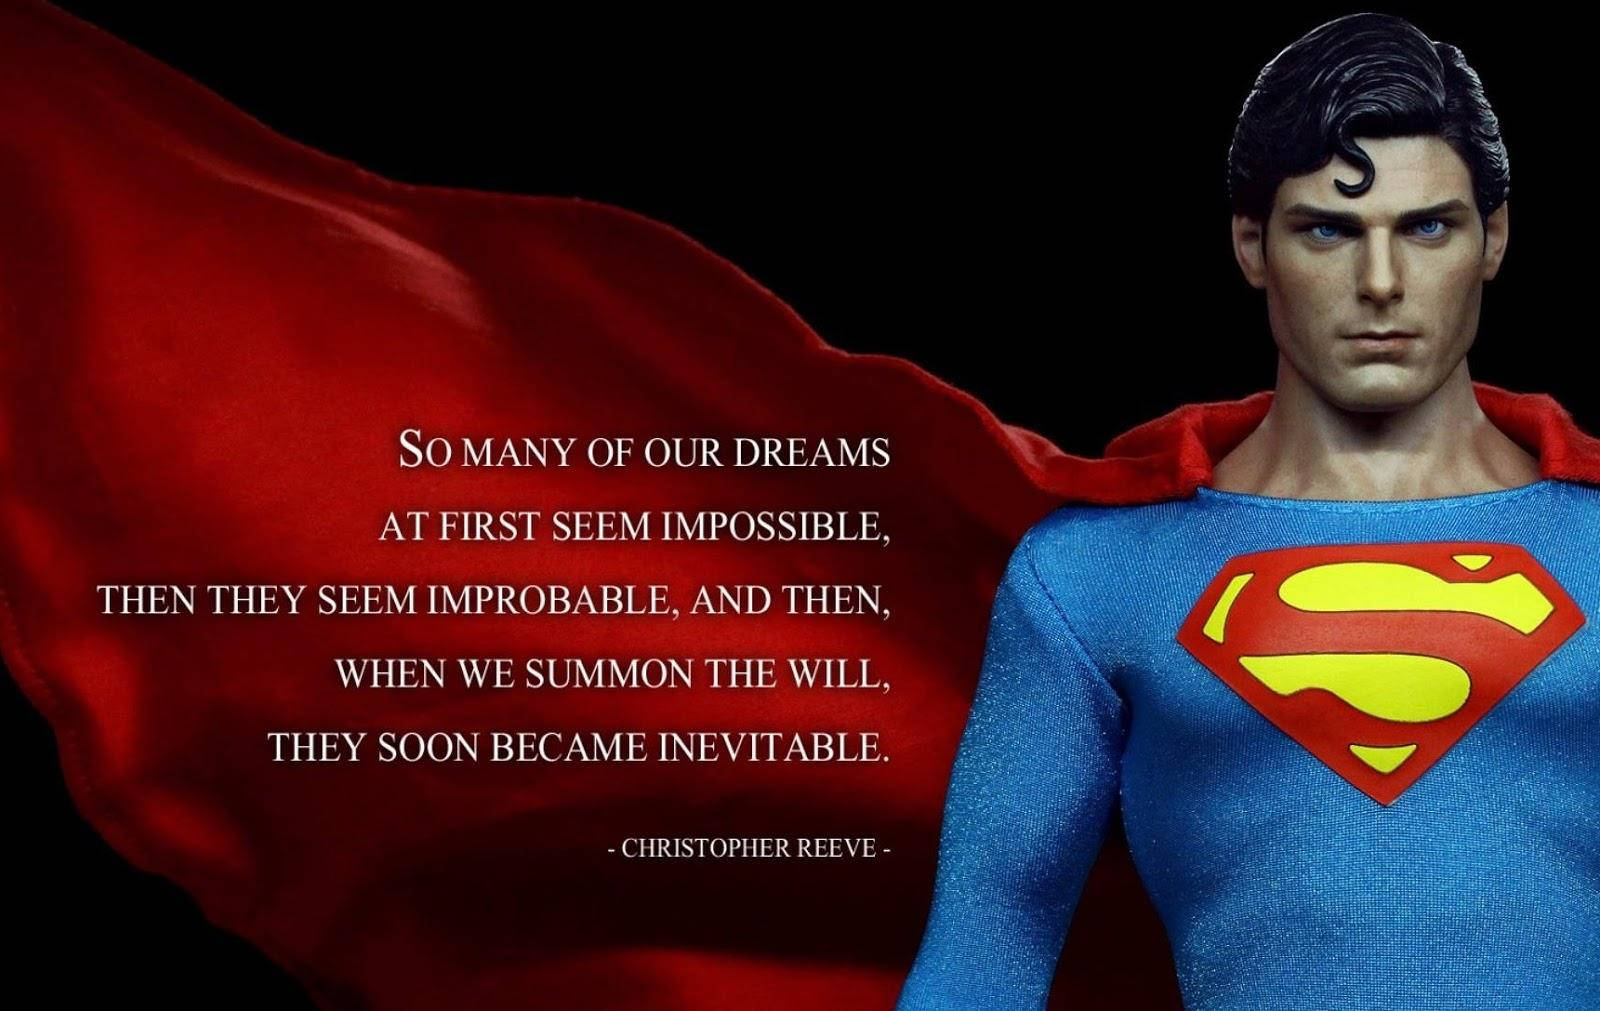 Christopher Reeve Dream Quote